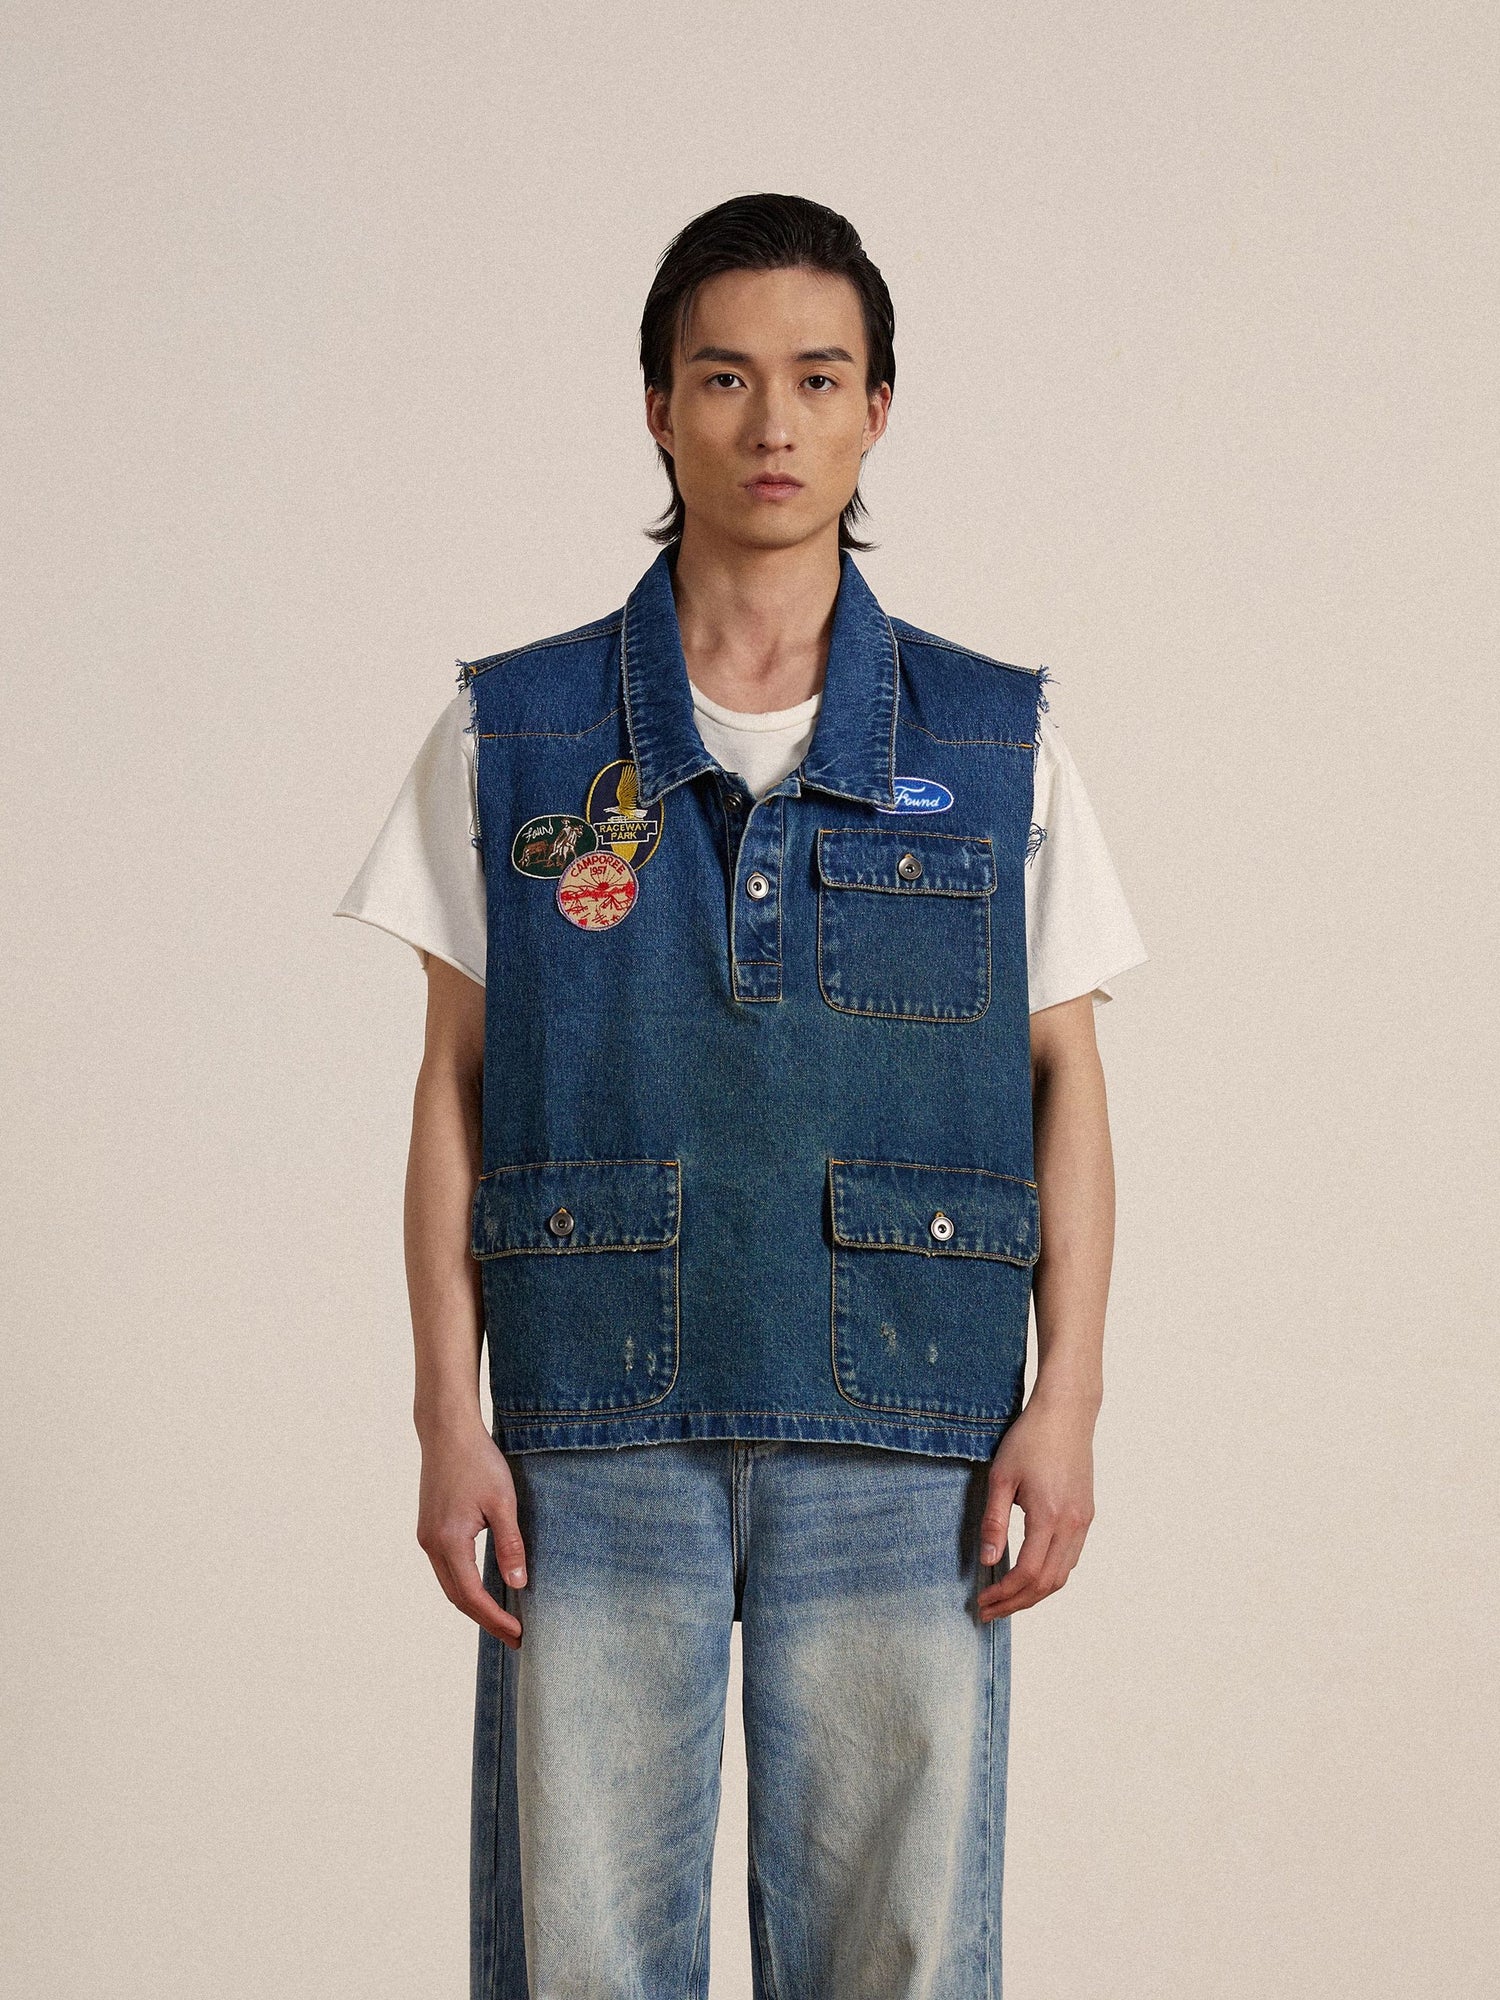 A young man stands wearing a sleeveless Found Raw Cut Patch Mechanic Denim Vest adorned with embroidered patches over a denim shirt and jeans, in front of a neutral backdrop.